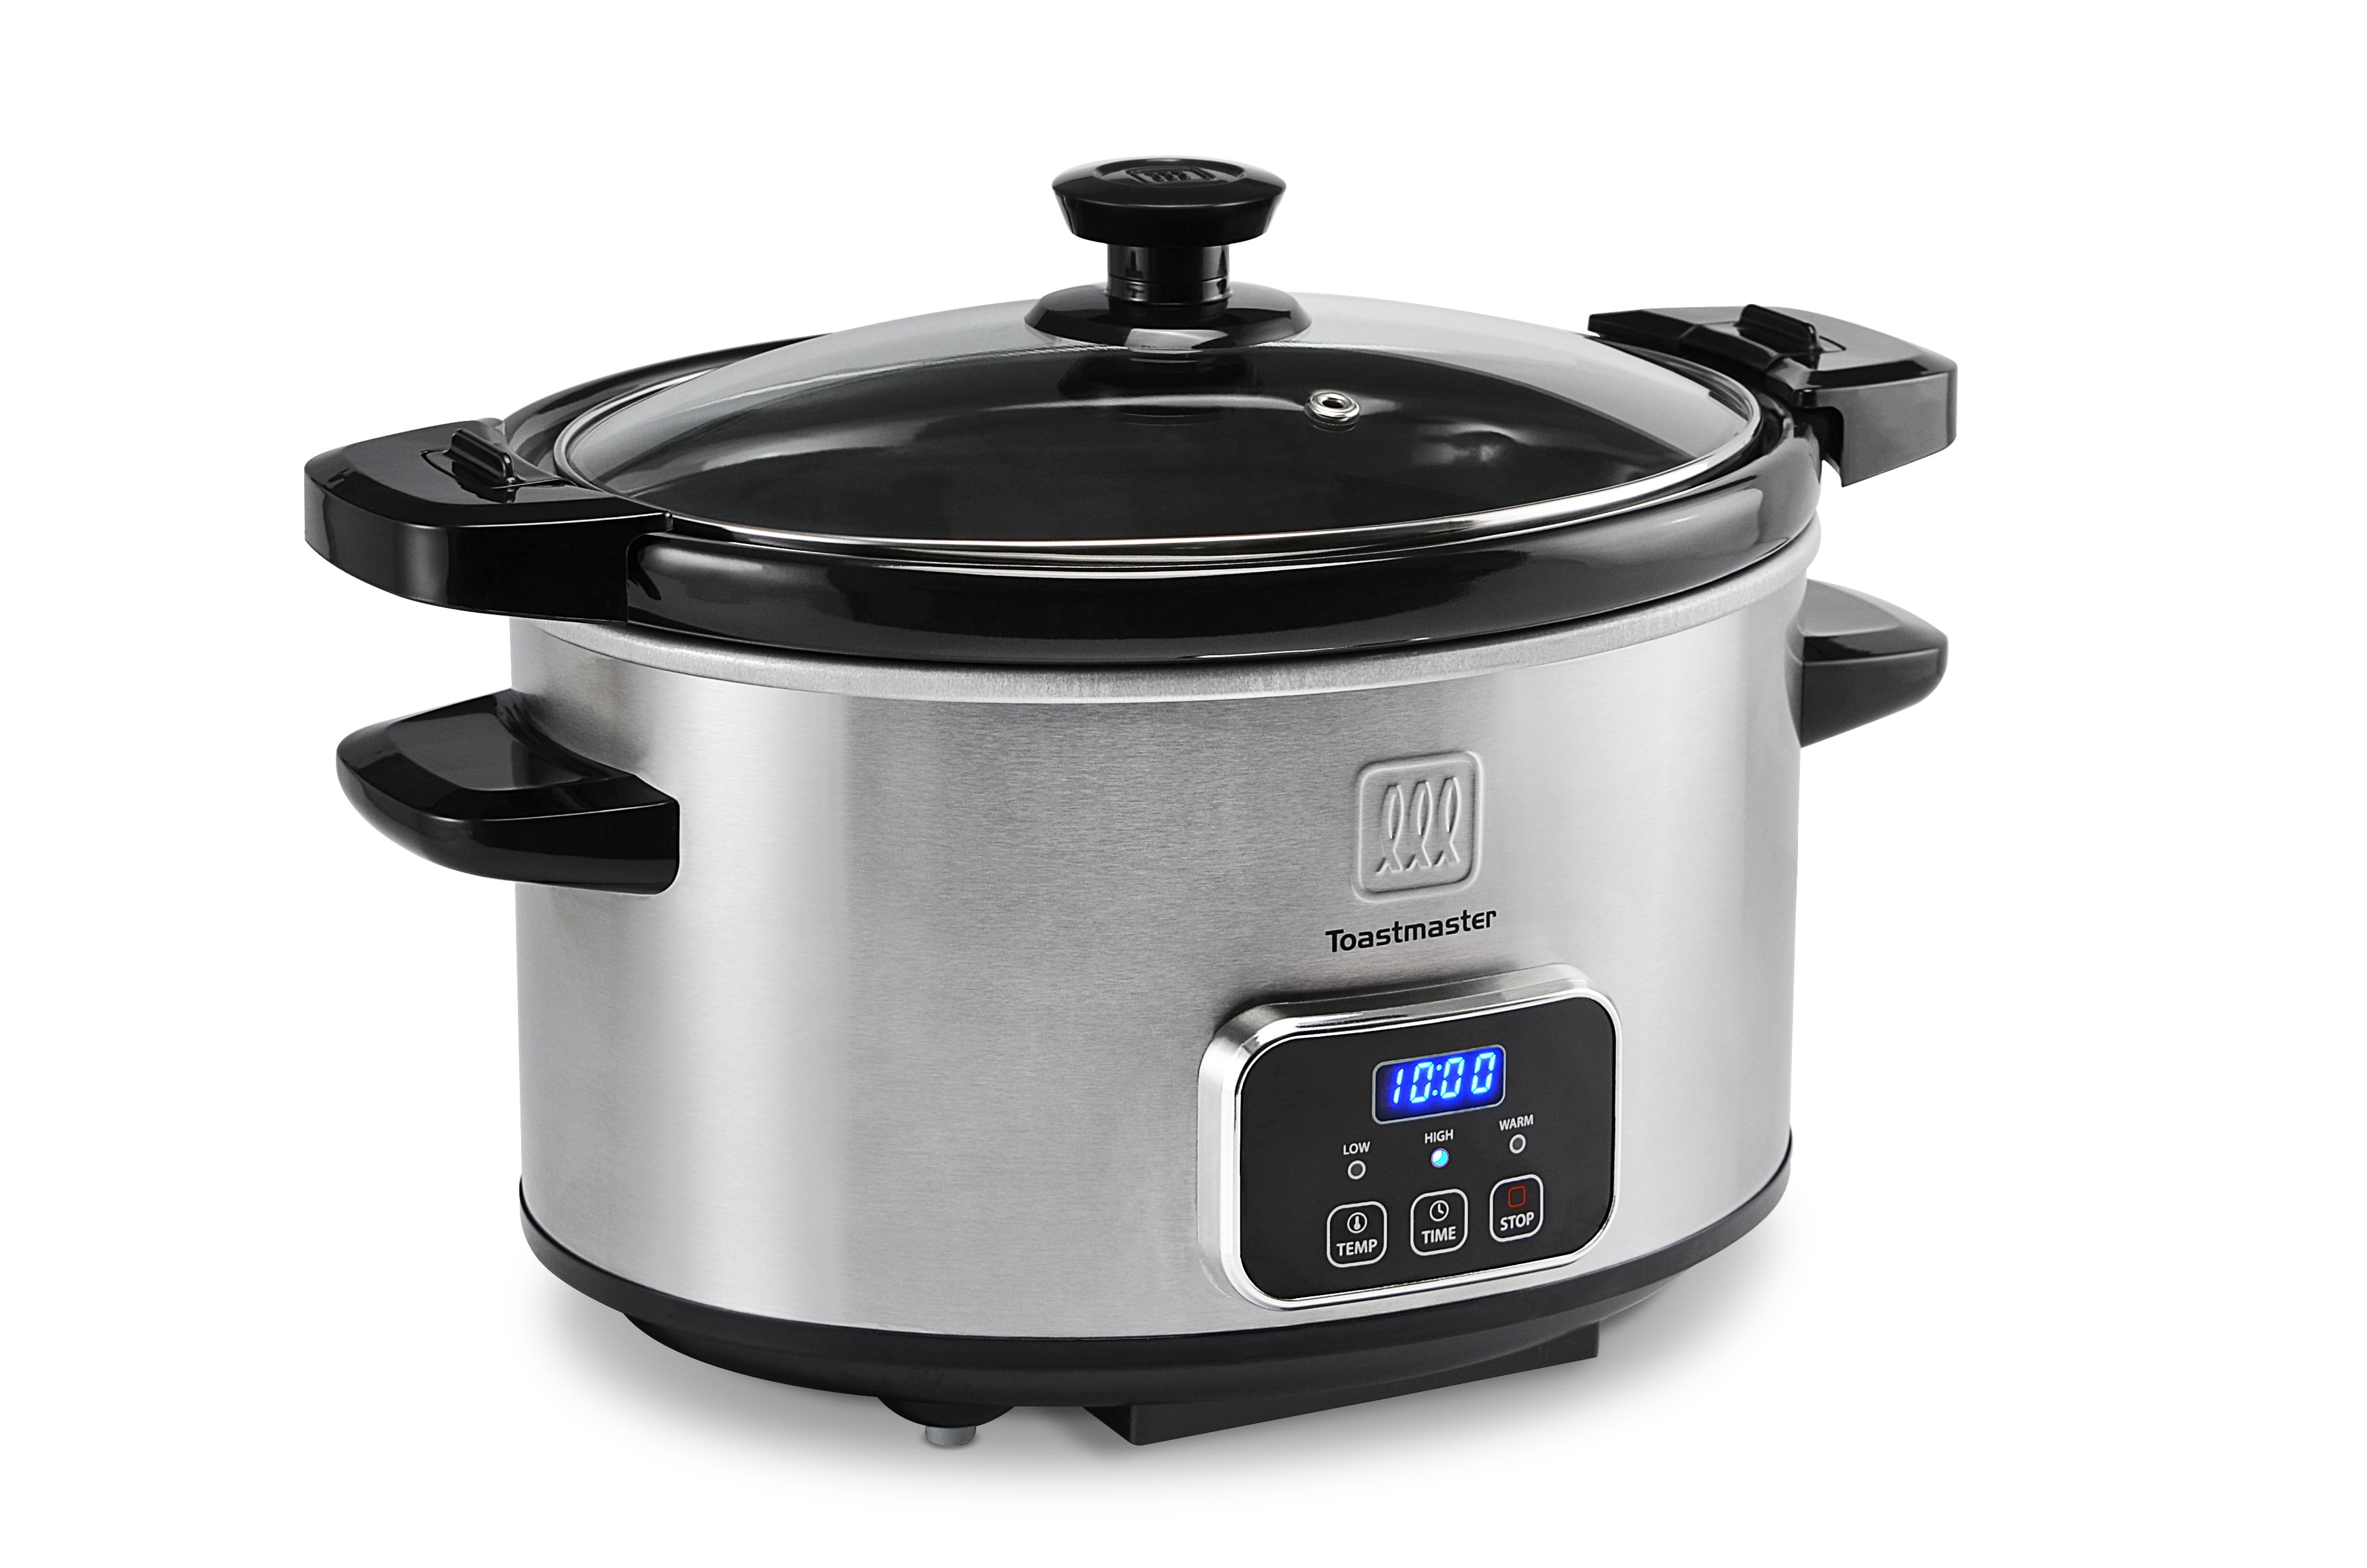 Toastmaster 4-Quart Digital Slow Cooker with Locking Lid (Graphite)